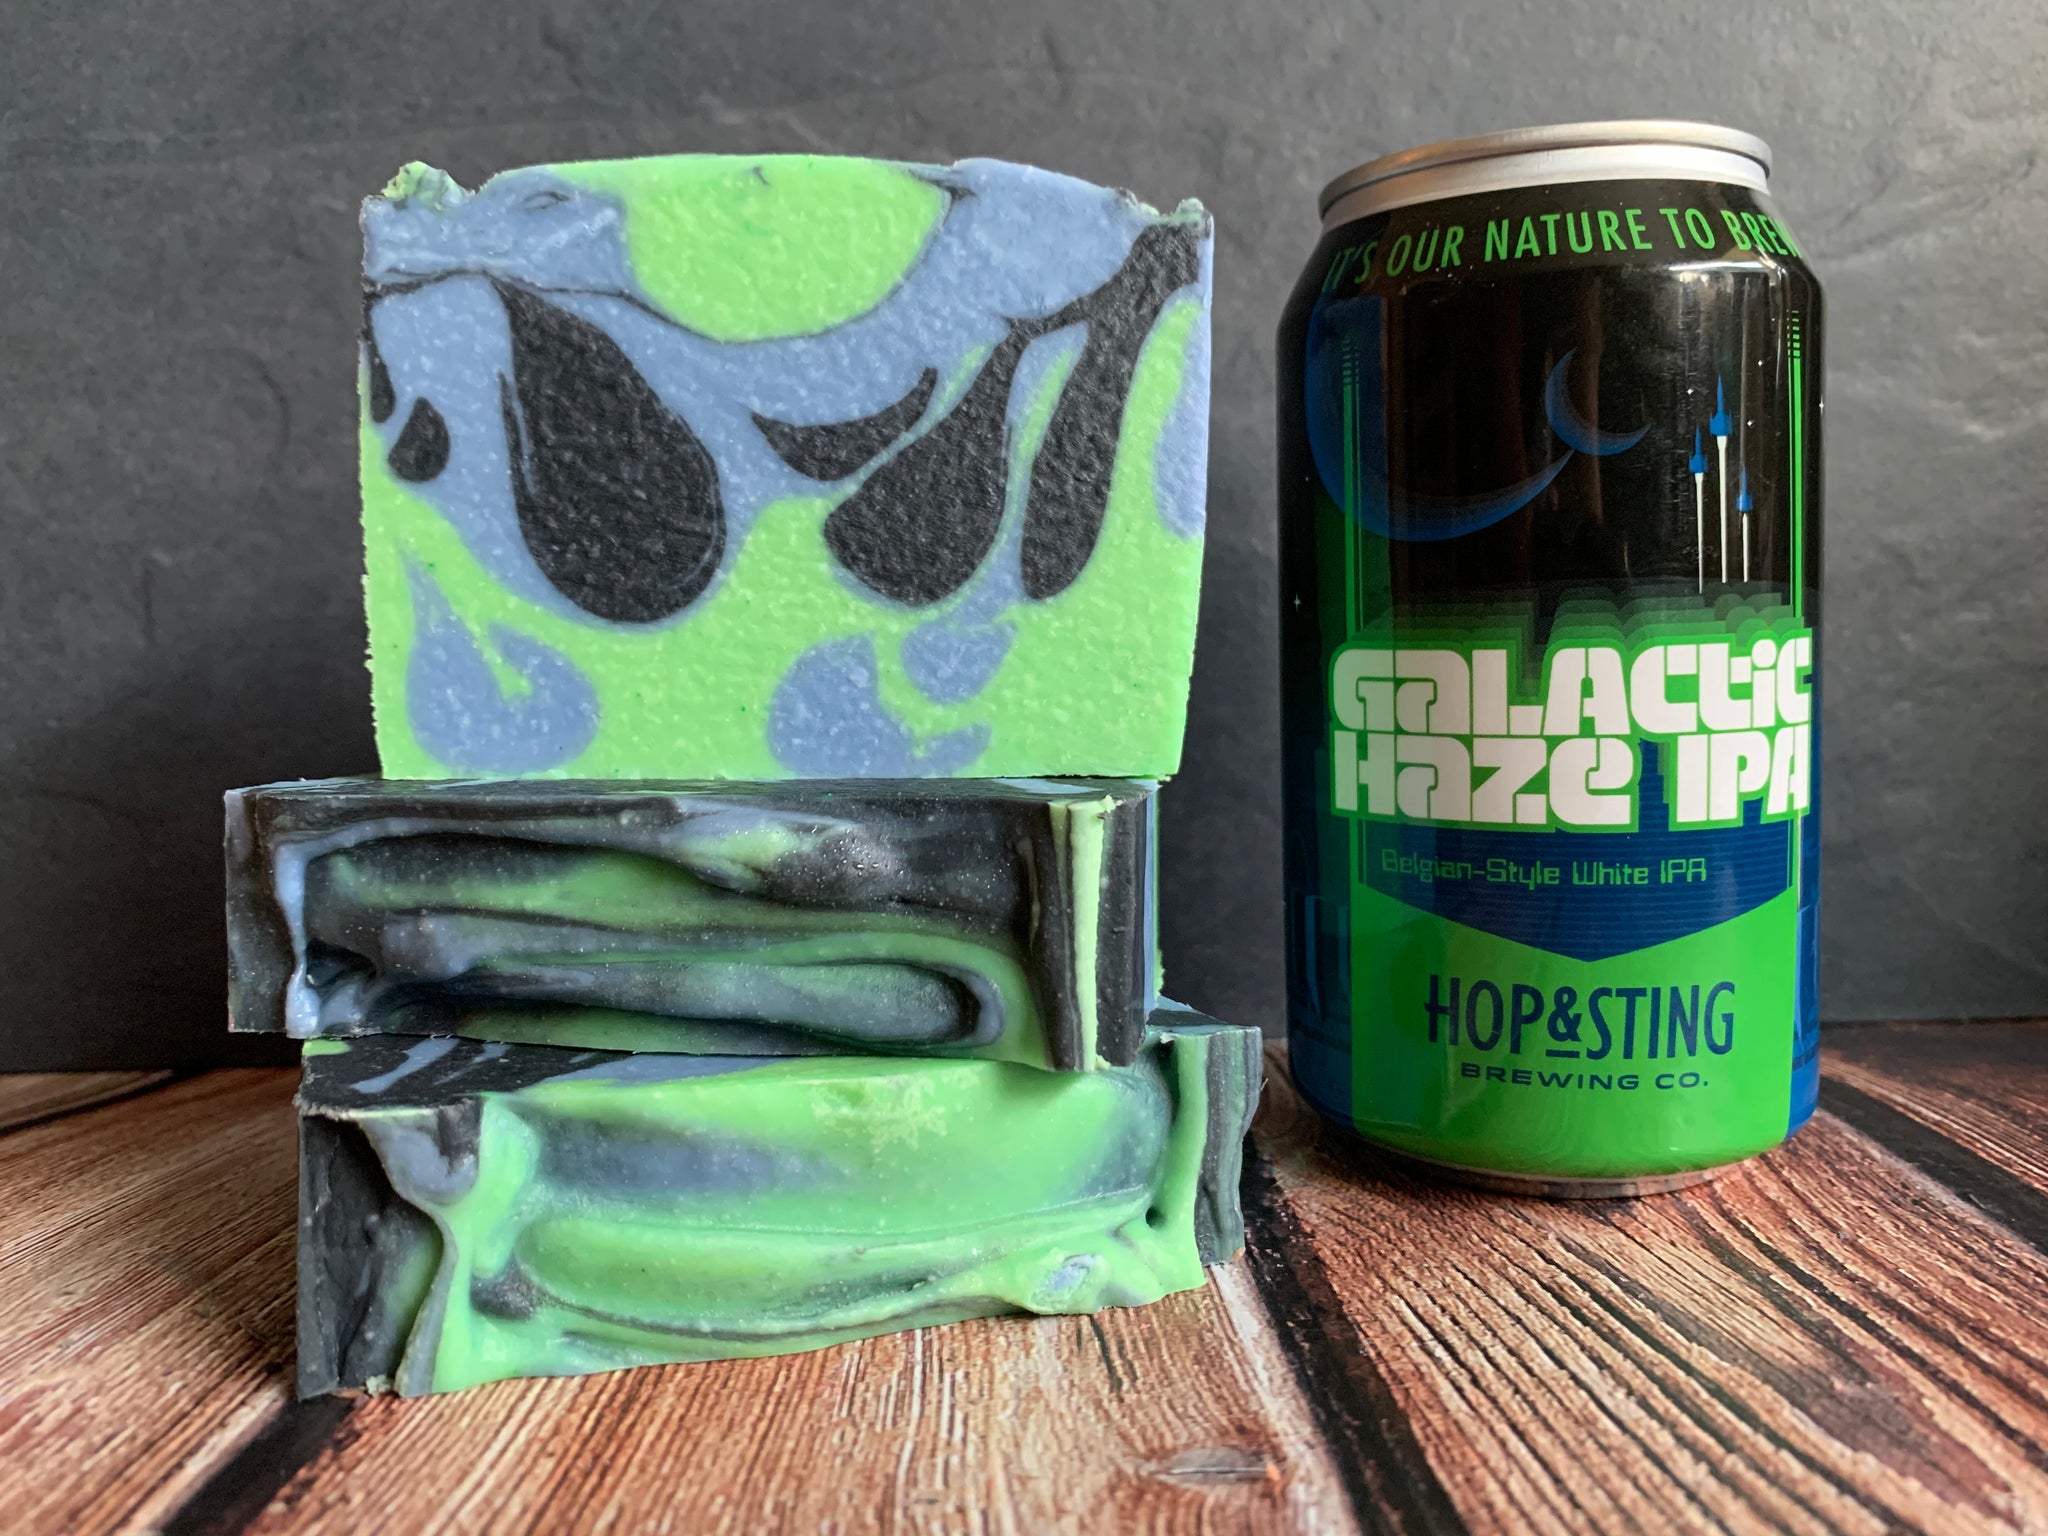 craft beer soap handmade in texas with galactic haze ipa craft beer from hop and sting brewing co  grapevine texas craft brewery blue green and black soap for him with activated charcoal spunkndisorderly craft beer soaps